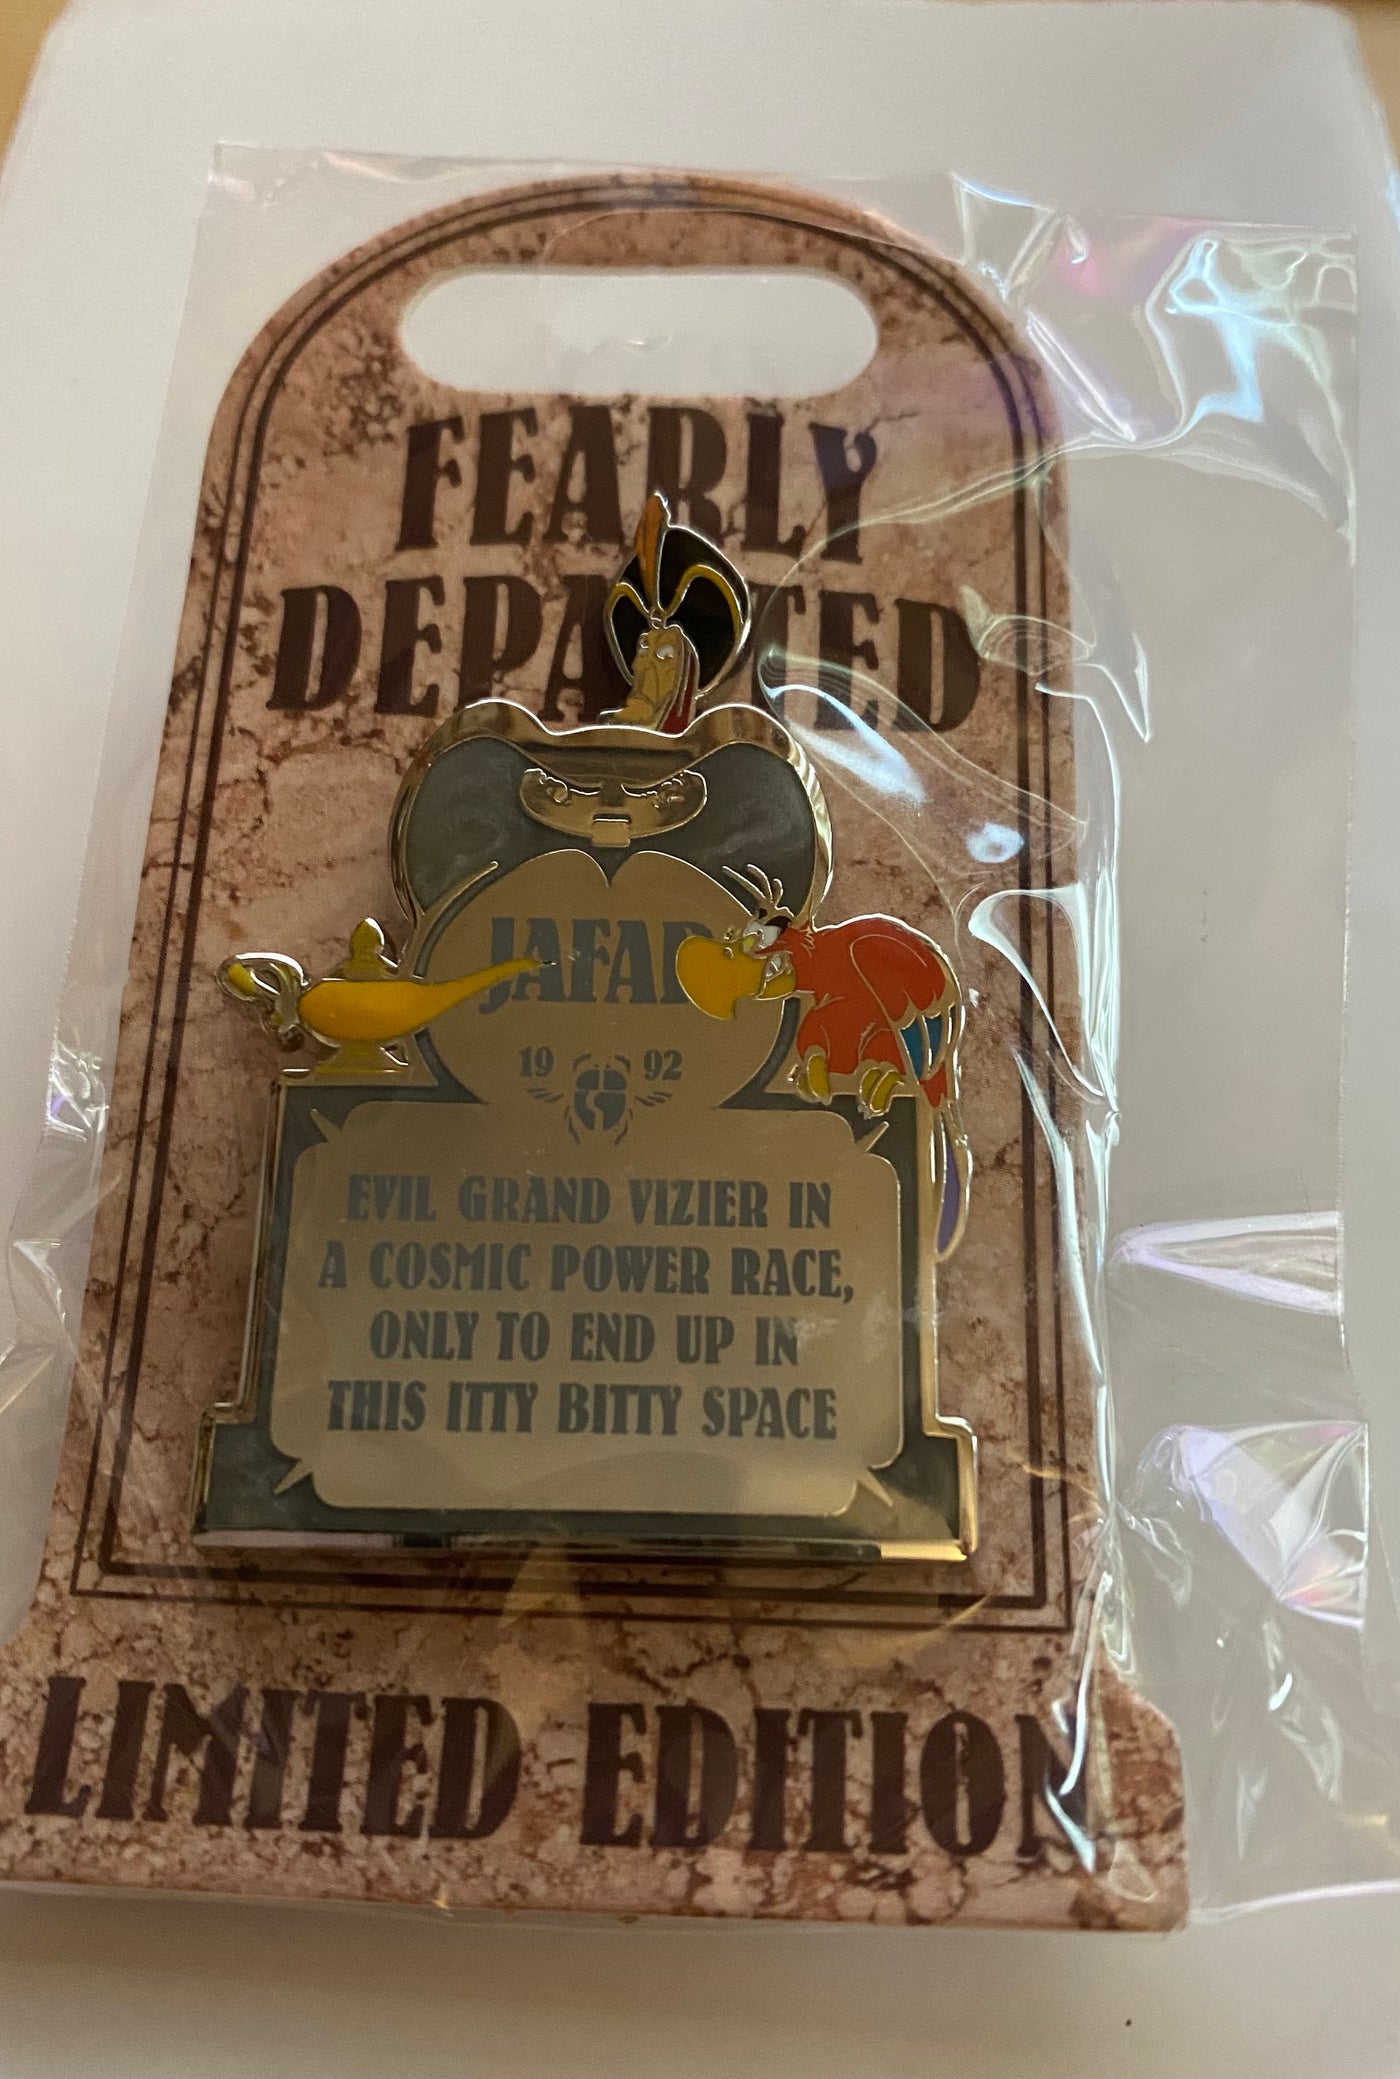 Disney Parks Fearly Departed Tombstone Jafar Aladdin Pin Limited New with Card